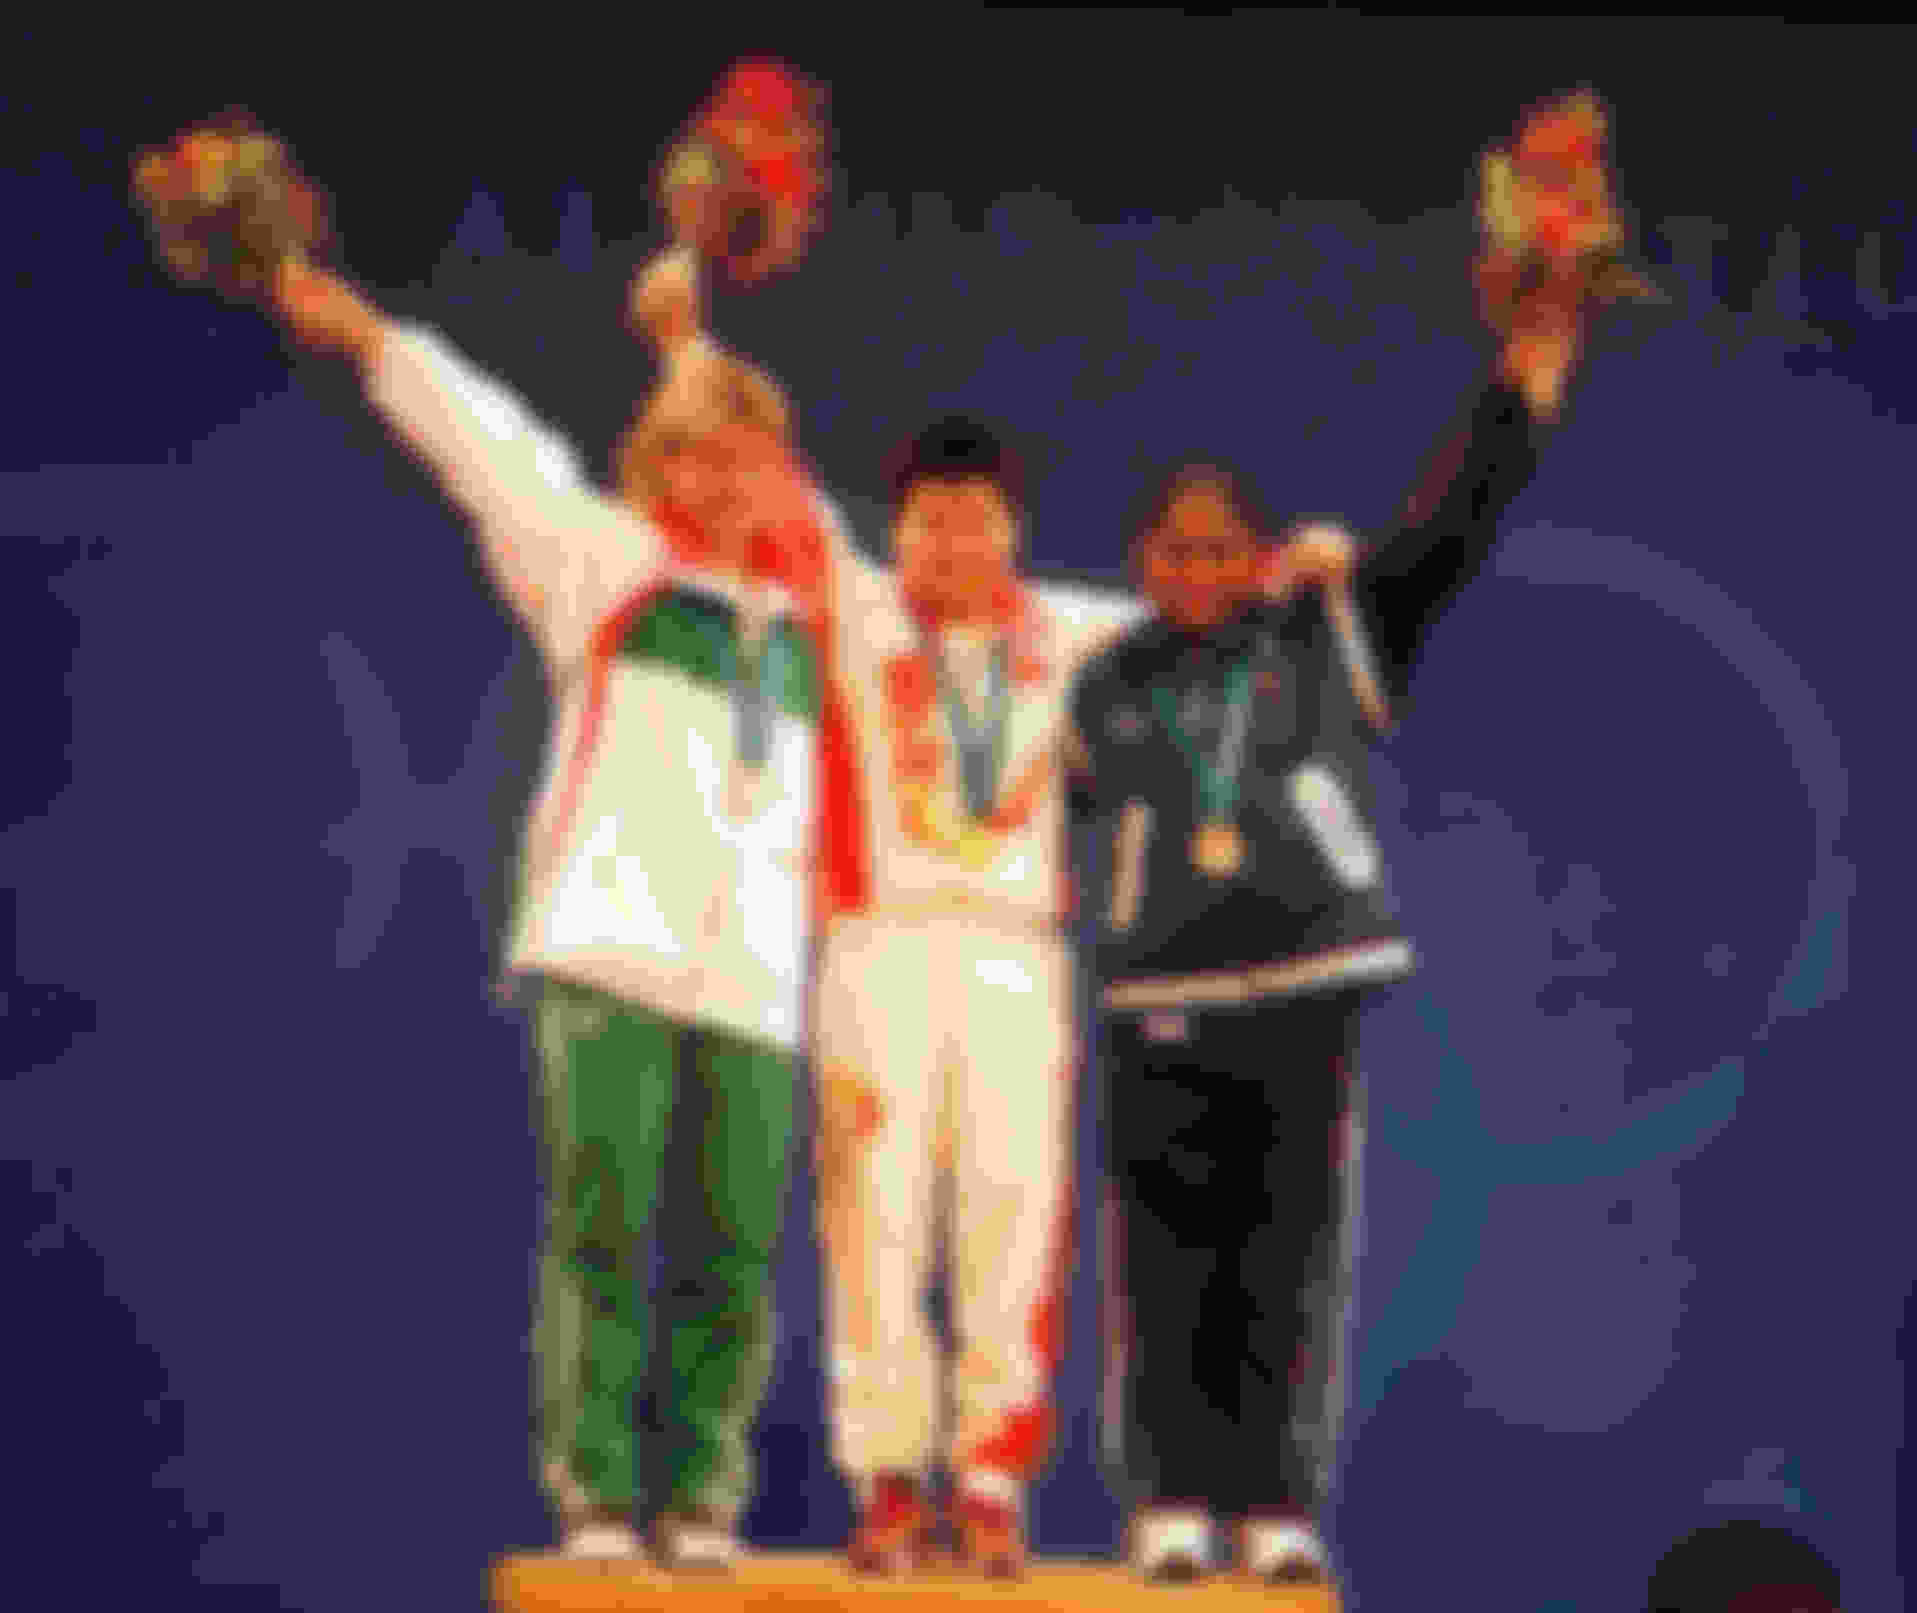 At the 2000 Sydney Games, Karnam Malleswari became the first Indian woman to win an Olympic medal.